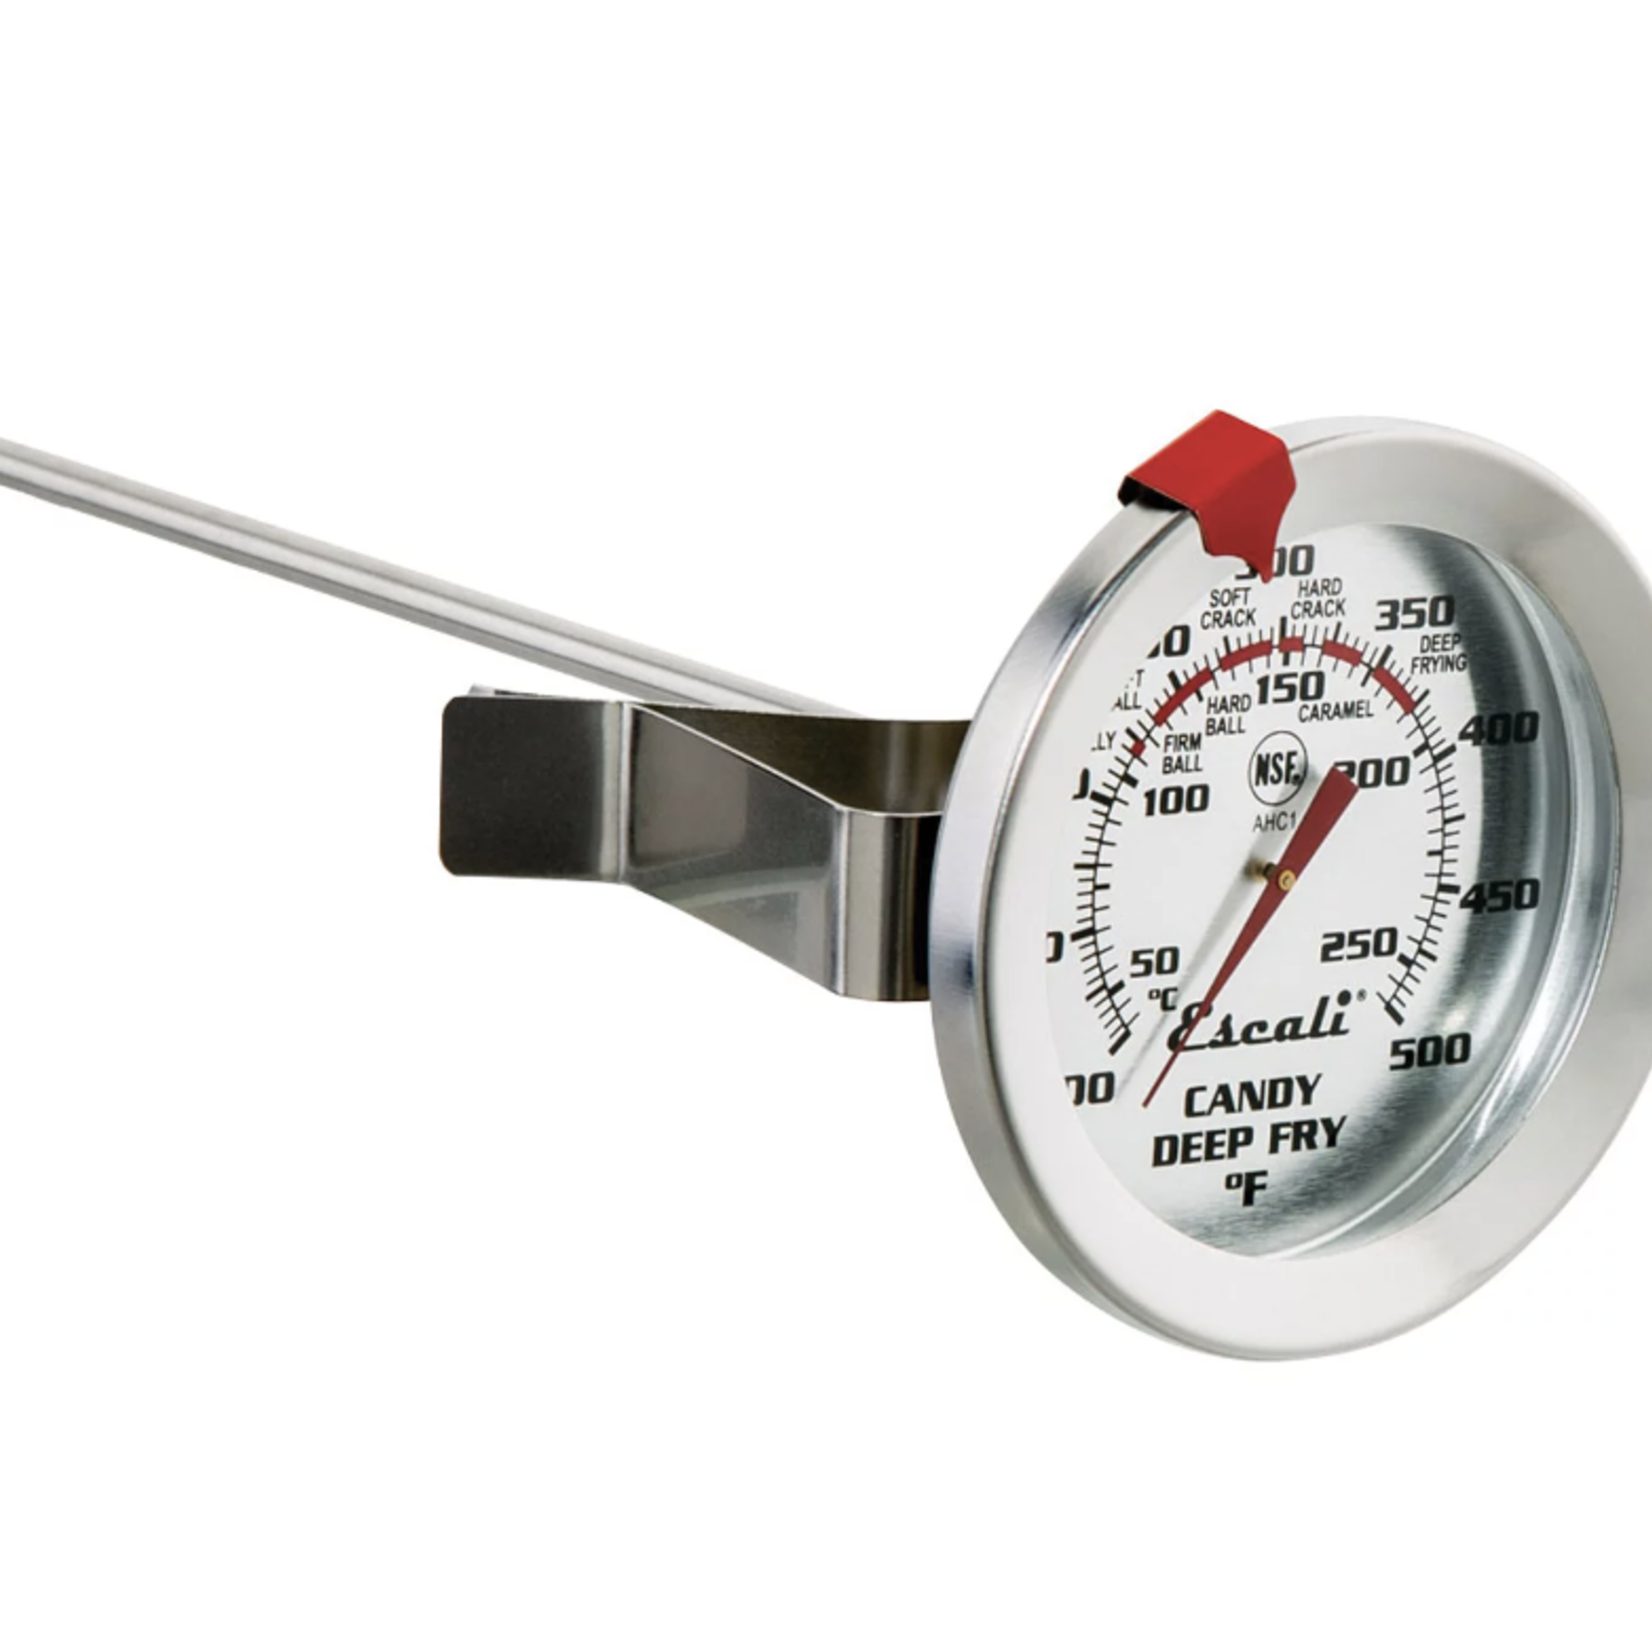 Escali Candy/Deep Fry Thermometer, 5.5"